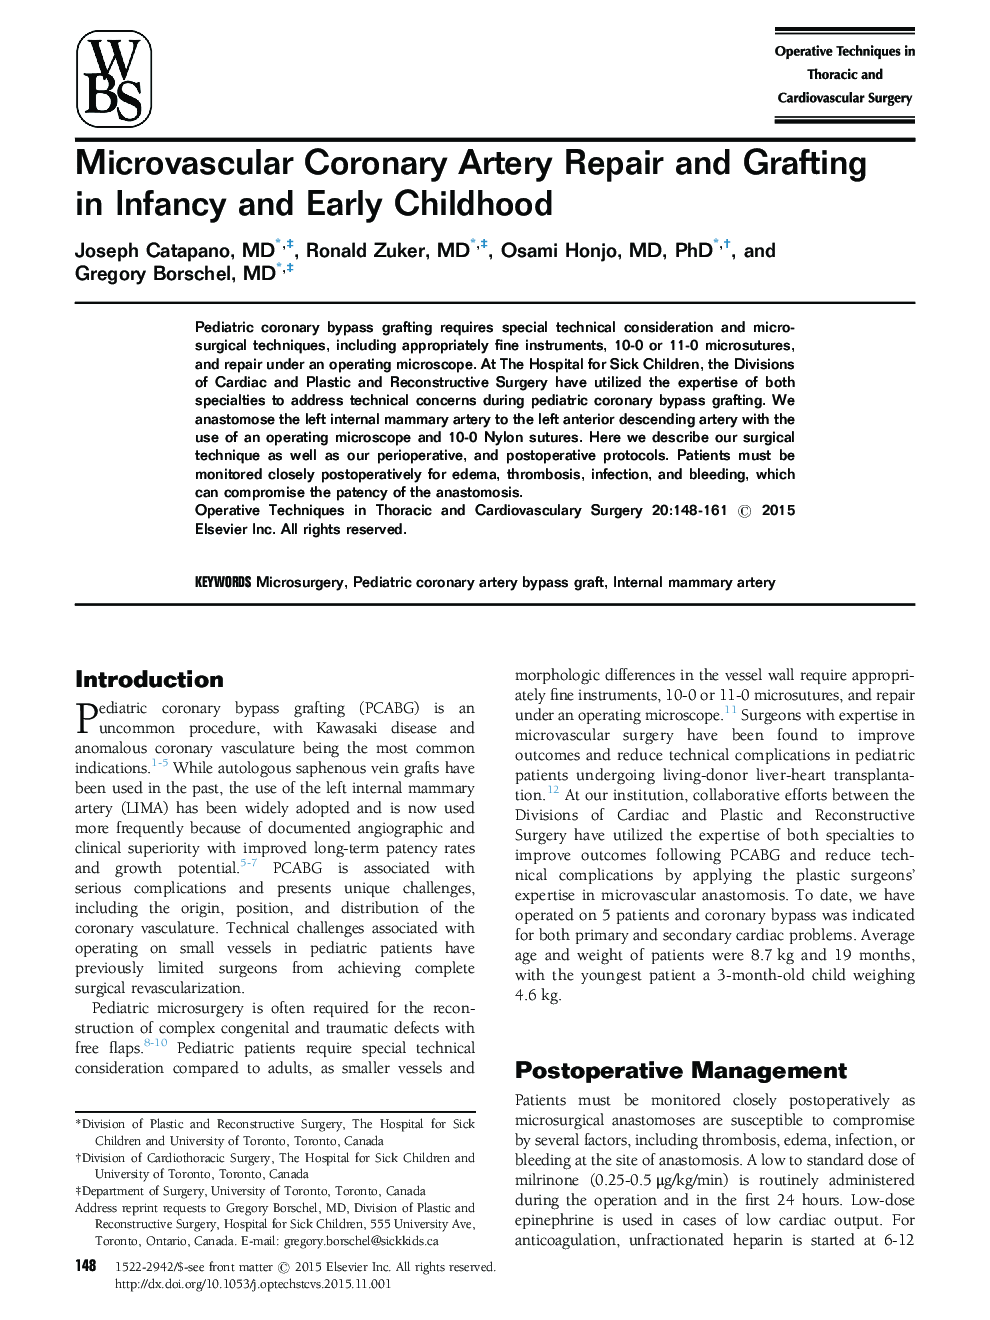 Microvascular Coronary Artery Repair and Grafting in Infancy and Early Childhood